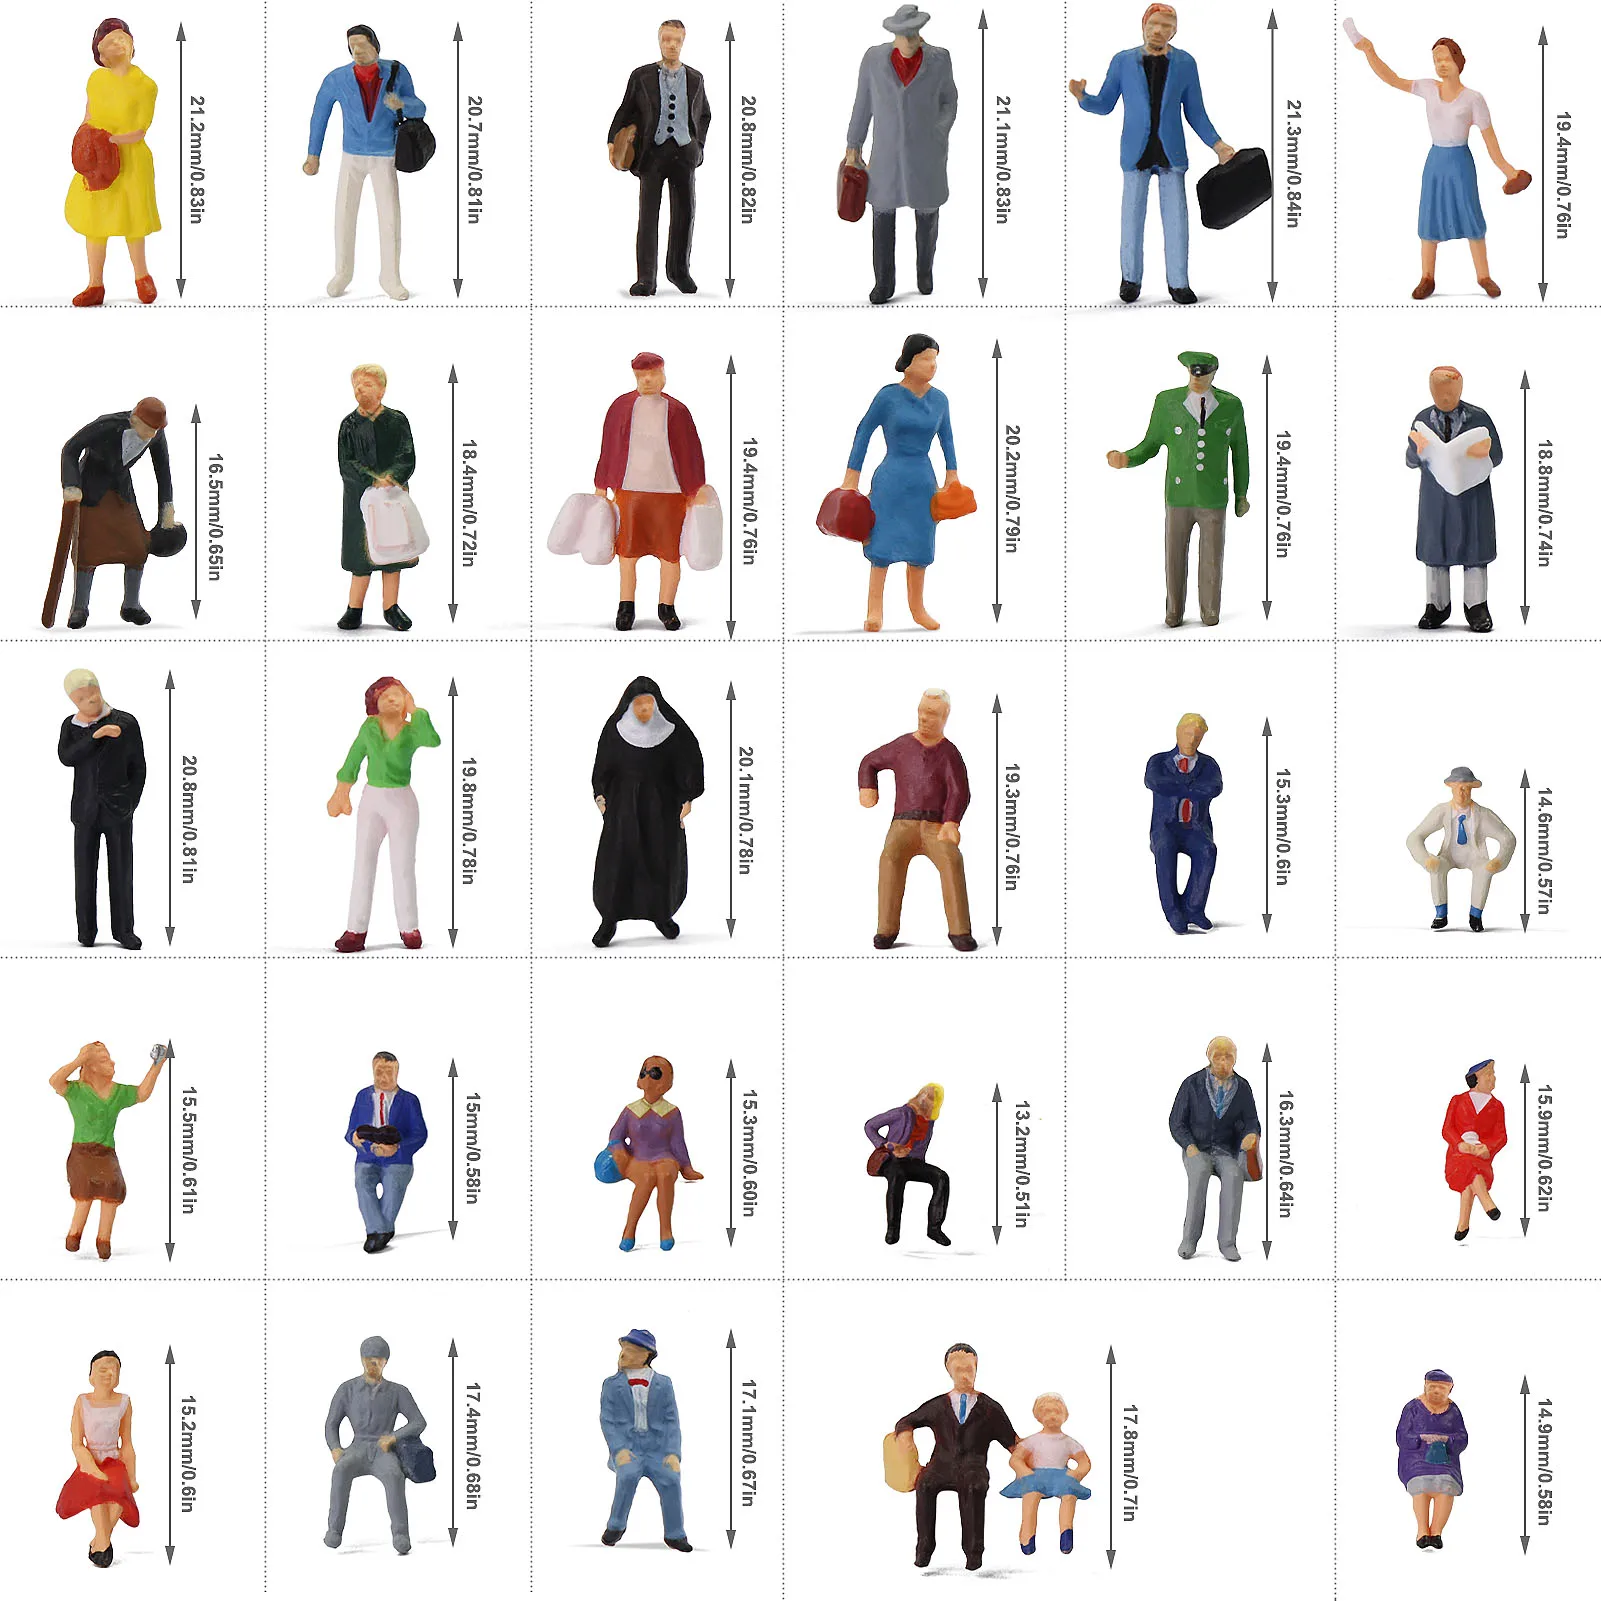 Details about   72pcs HO scale 1:87 Seated and Standing People Figures Passengers P8717 